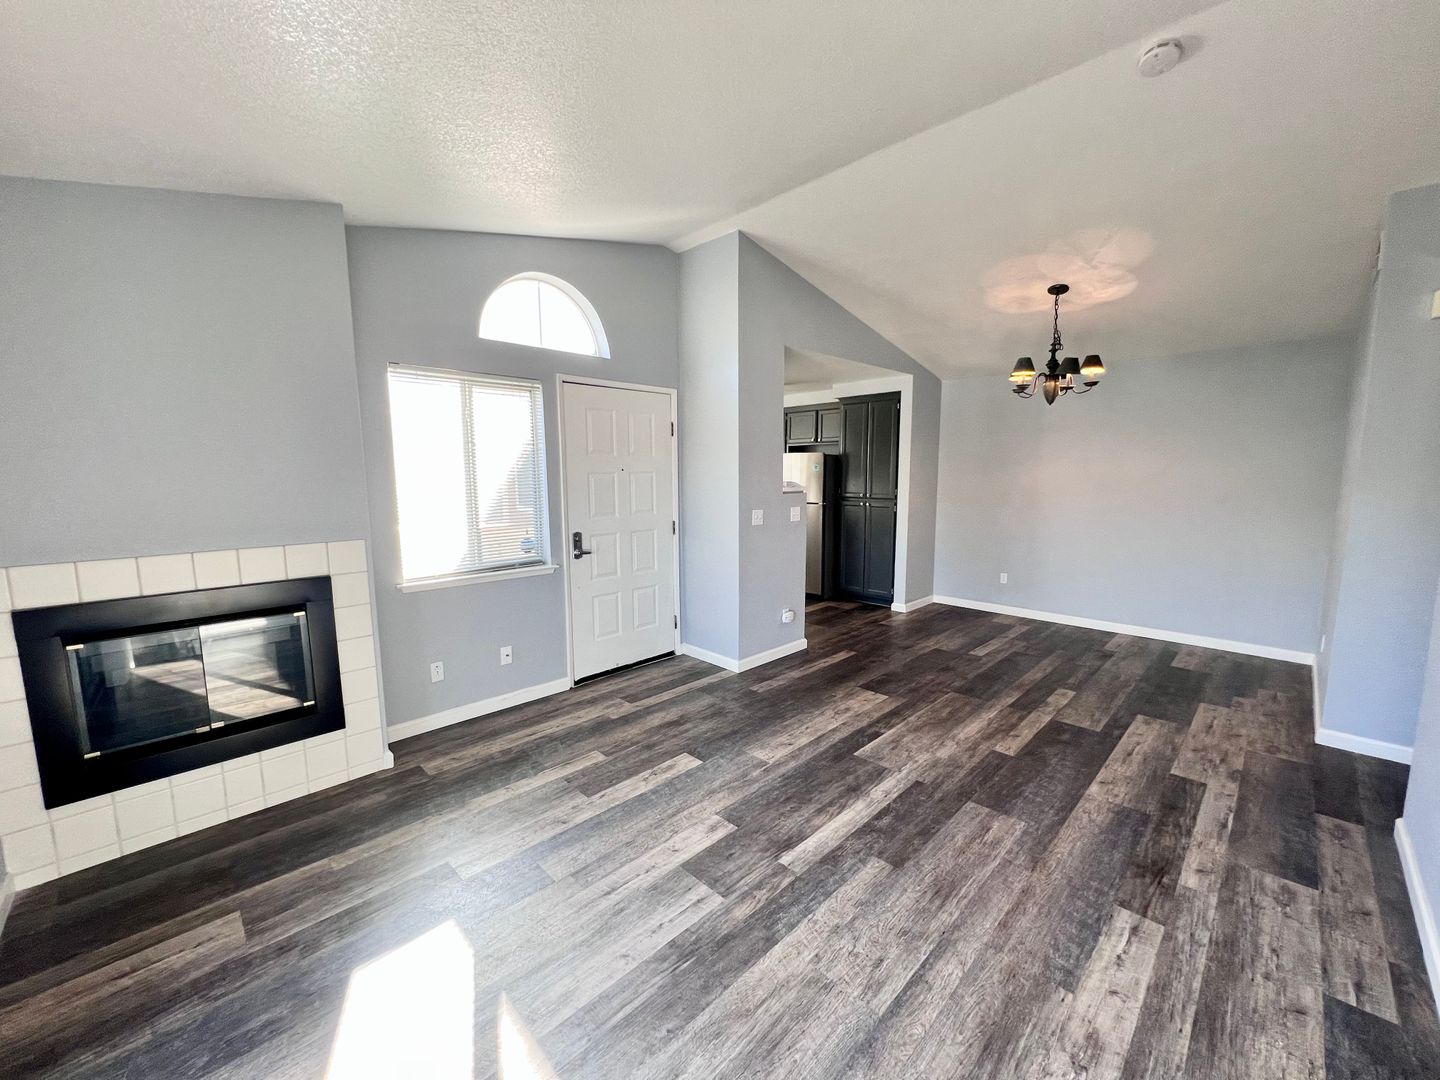 Beautifully updated 2 bedroom with garage and washer/dryer in a lovely Hercules community!